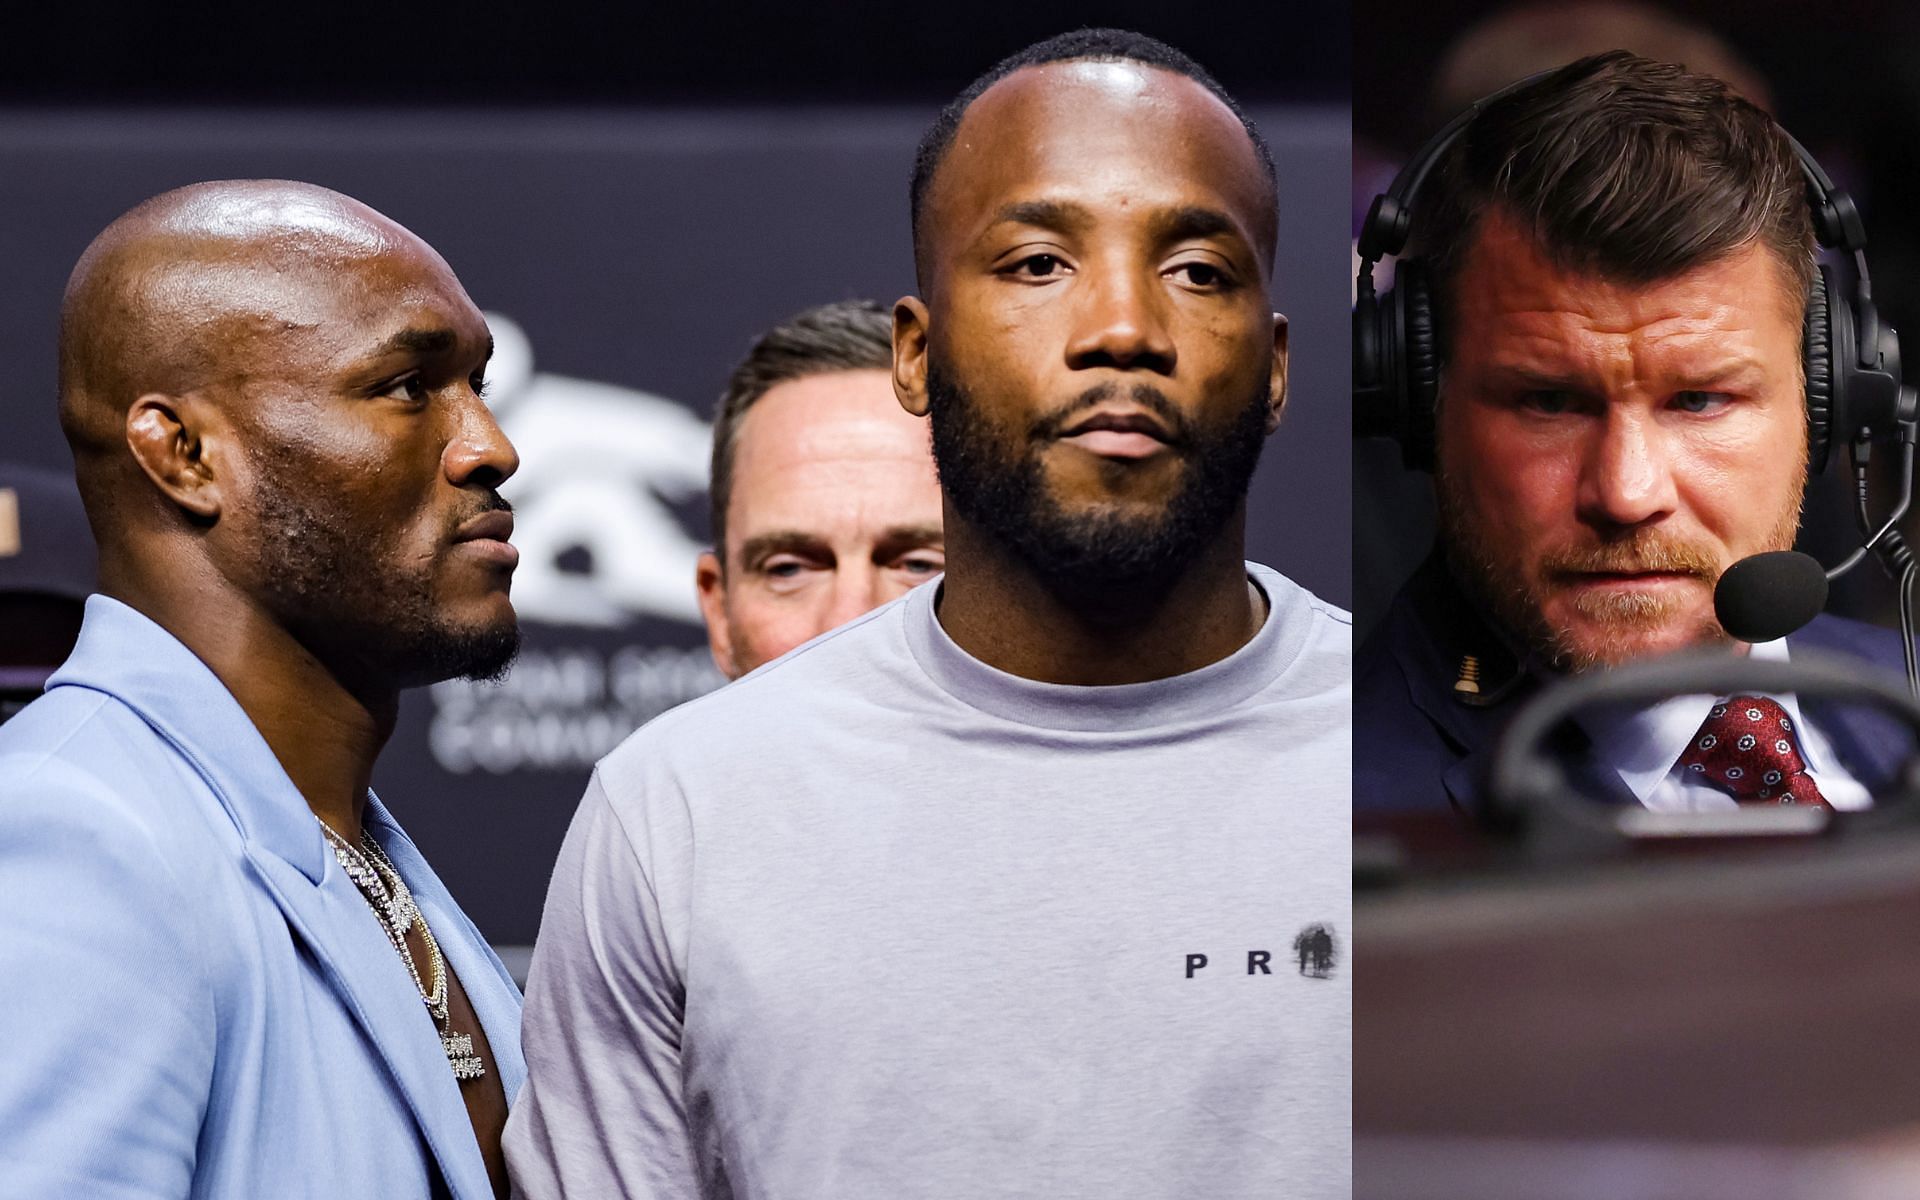 Kamaru Usman and Leon Edwards (left) and Michael Bisping (right). [Images courtesy: both images from Getty Images]